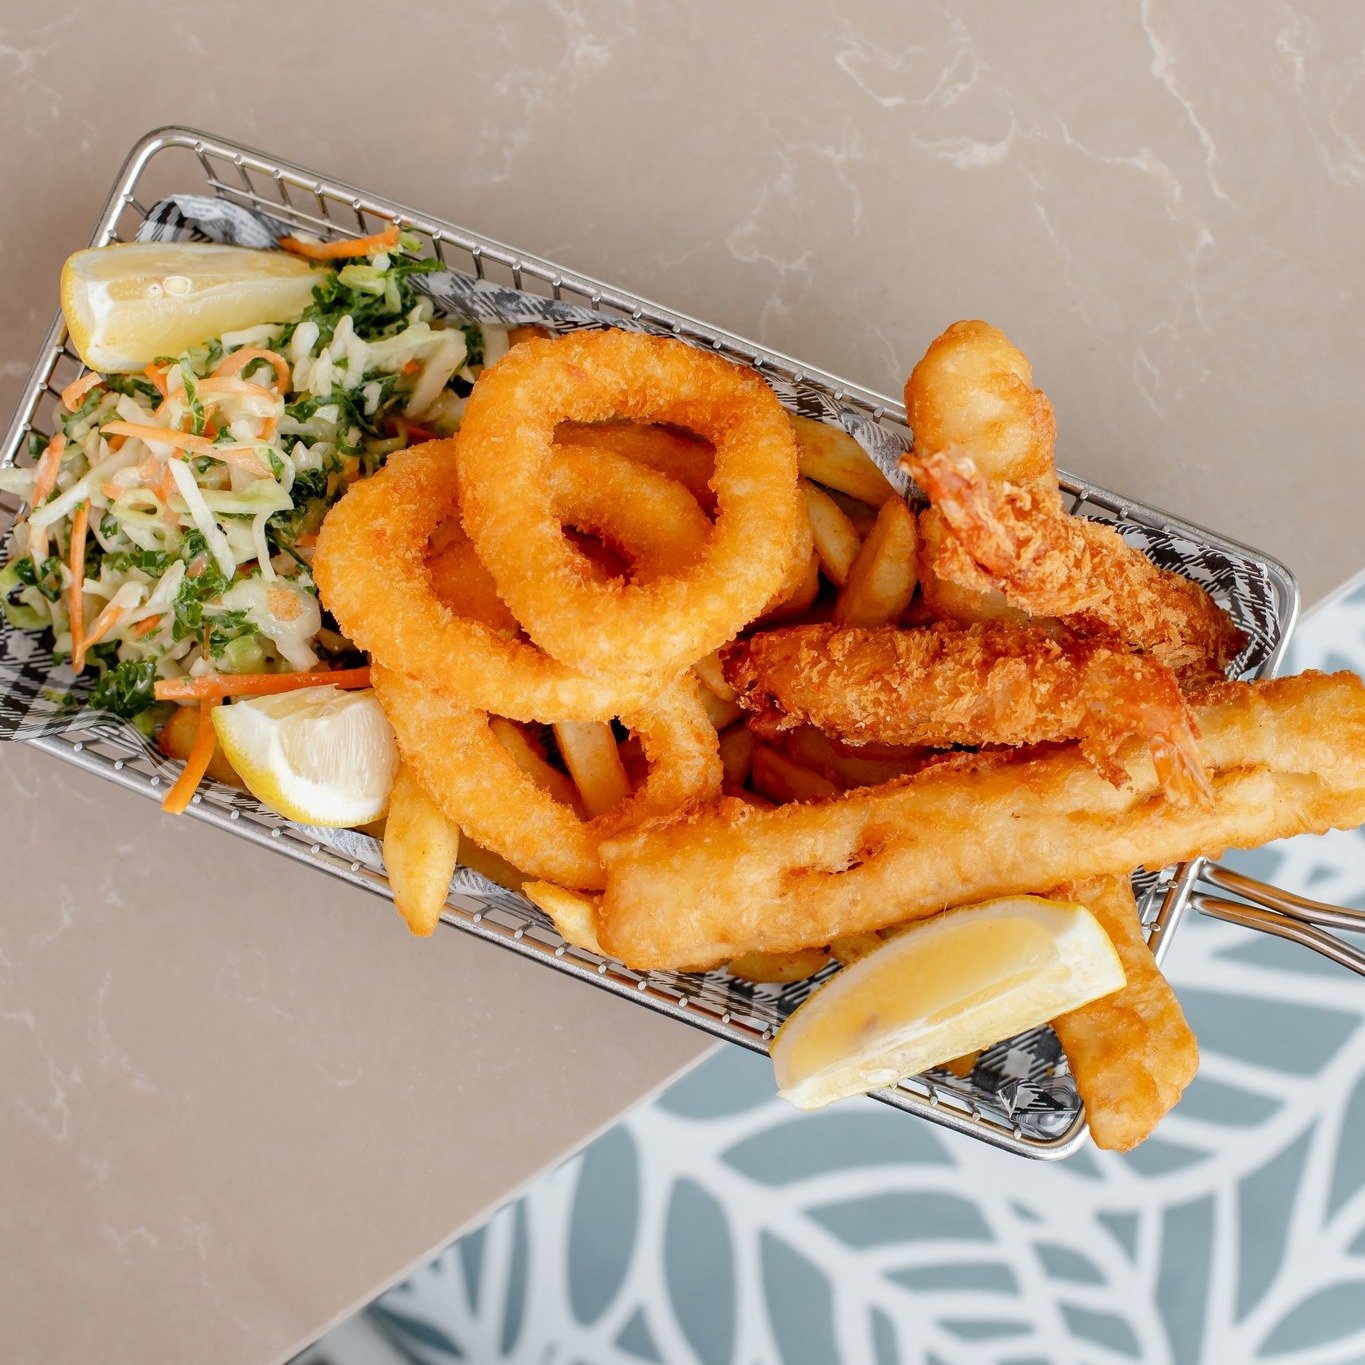 Fisherman's Basket on Thursday Nights Dive into a delightful array of delicious dinner specials available Monday through Thursday. 

Members can savour this feast for just $25, while visitors can enjoy it for $27. Don't miss out on this seafood sensa